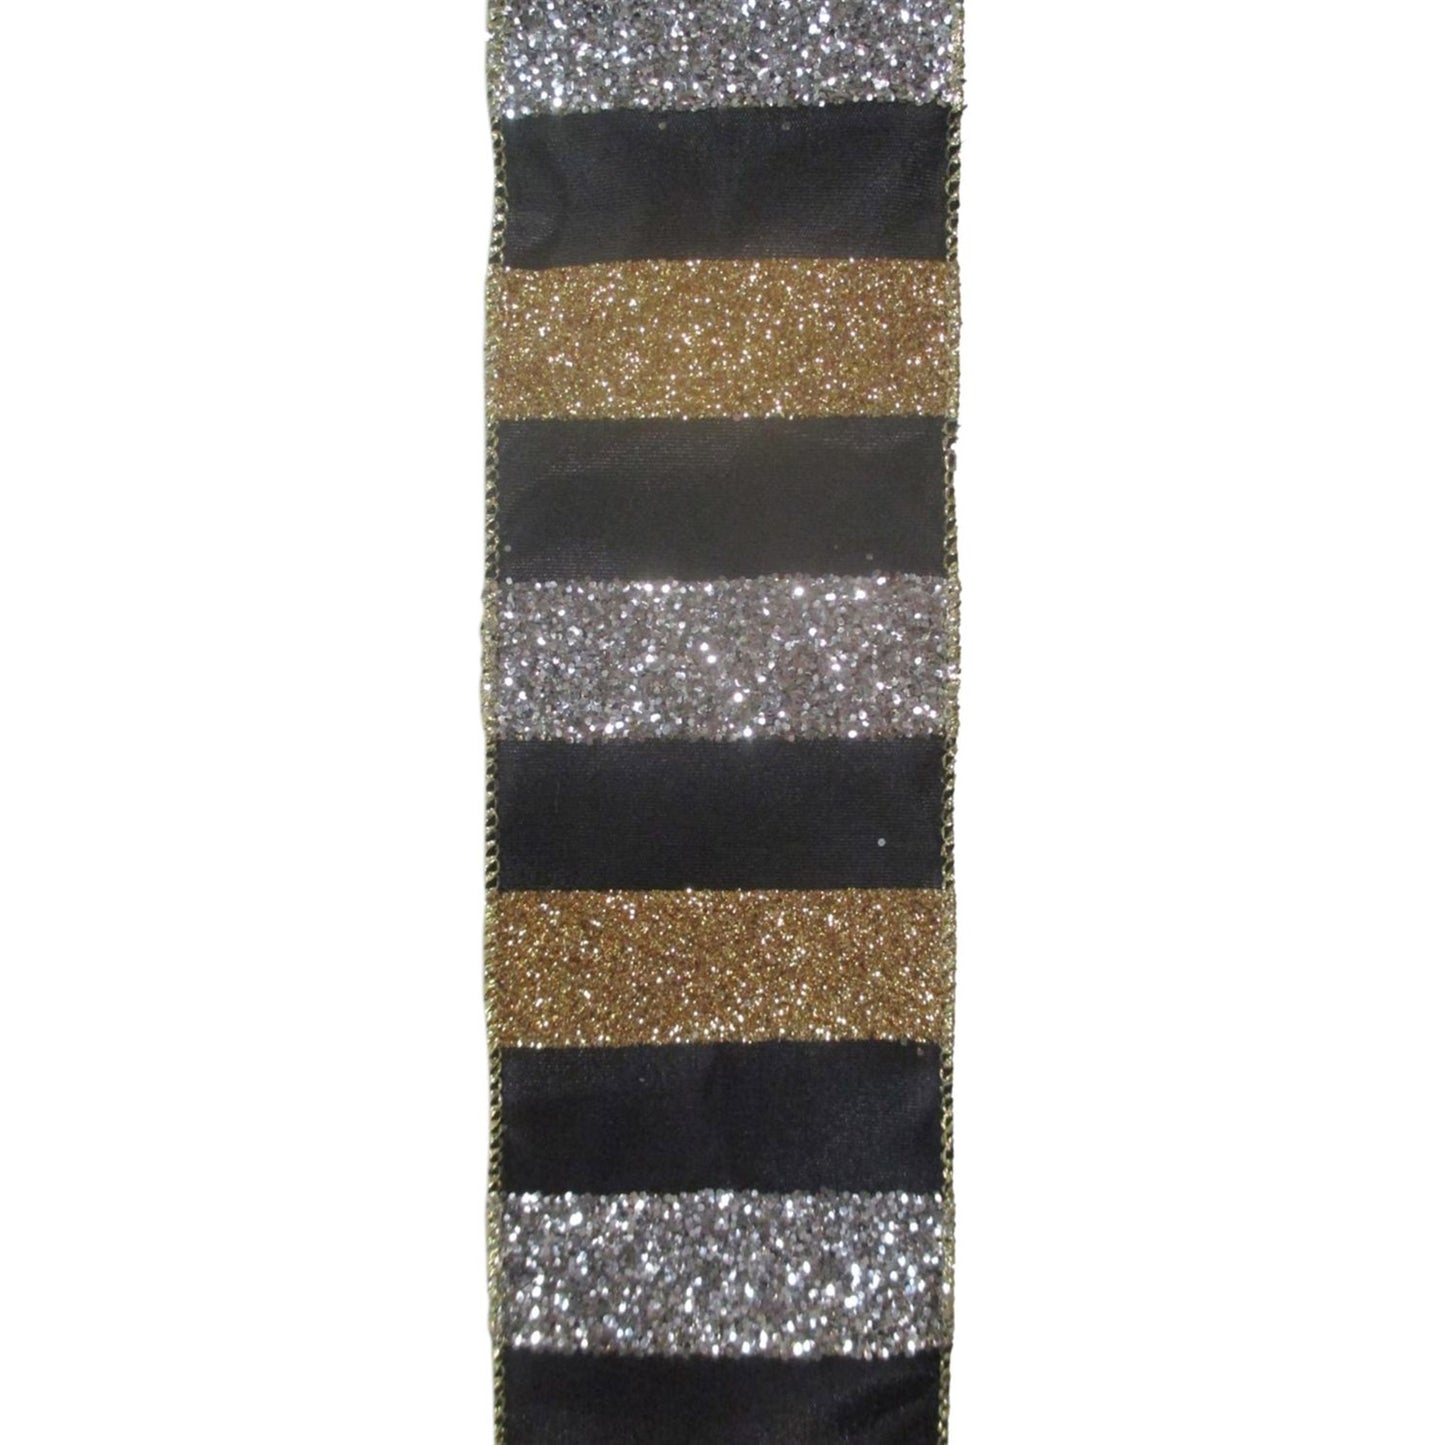 Large Glitter Striped Silver/Gold with Black backing Ribbon 2.5" x 10yd | YT